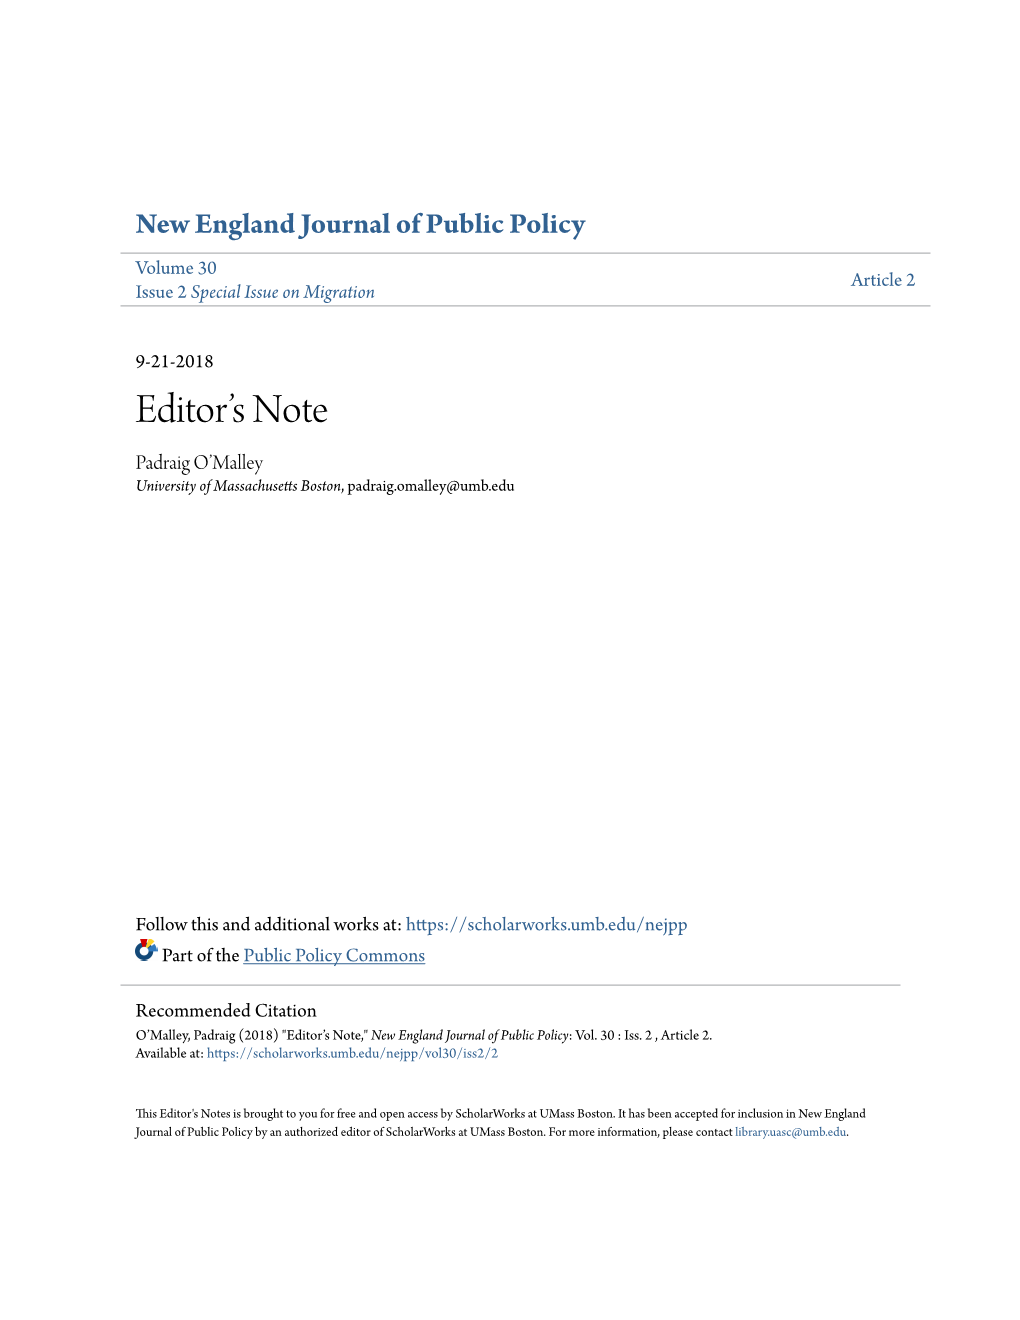 Editor's Notes Is Brought to You for Free and Open Access by Scholarworks at Umass Boston